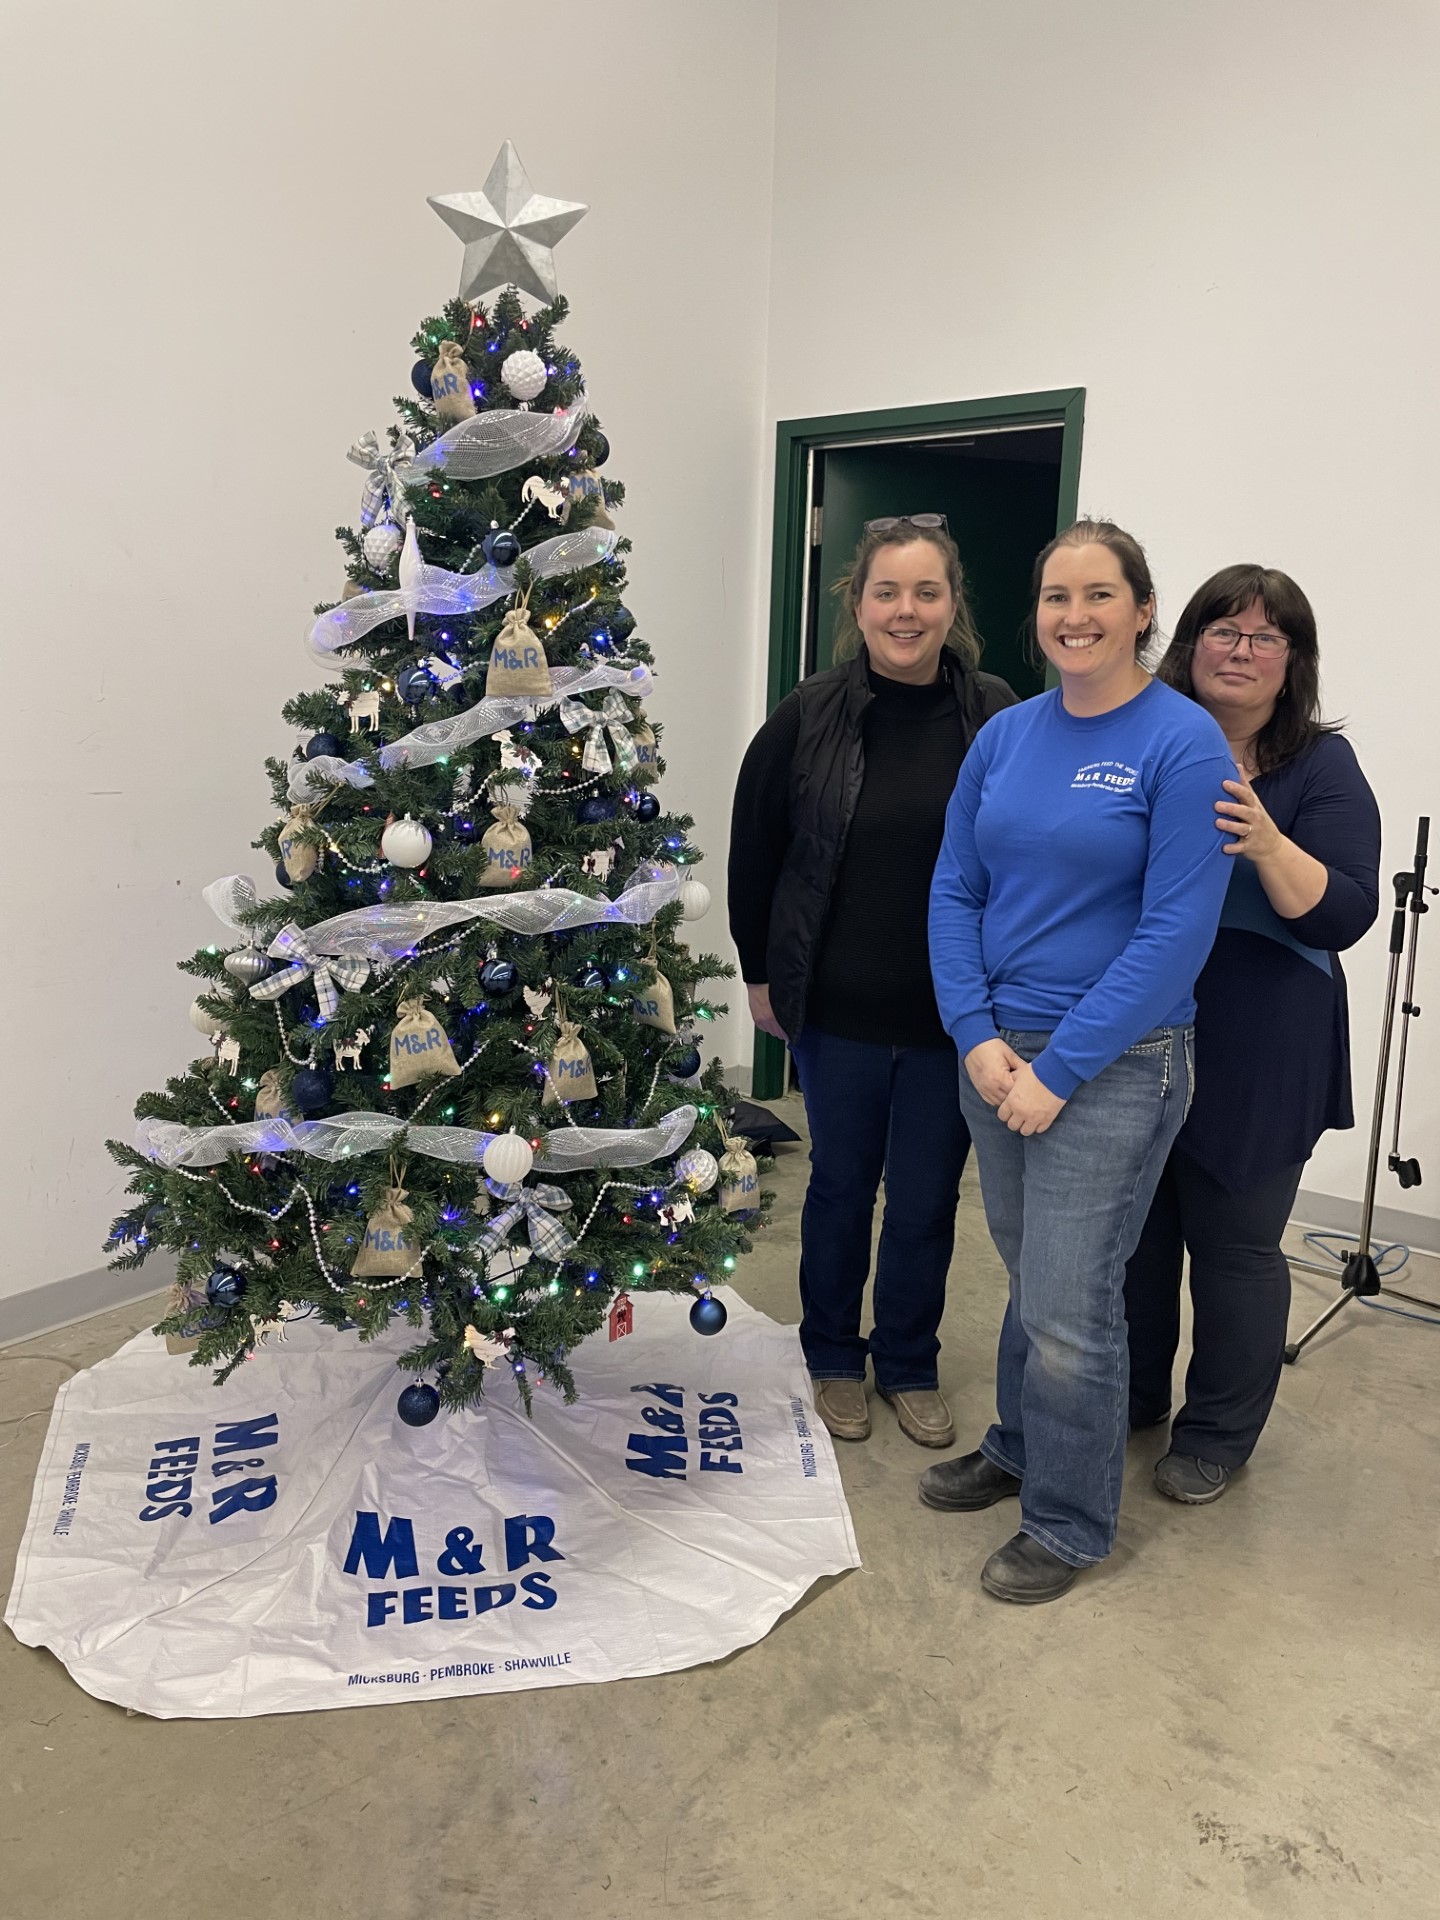 Angie, Emily and Shauna with the Christmas tree they decorated for M&R Feeds entry